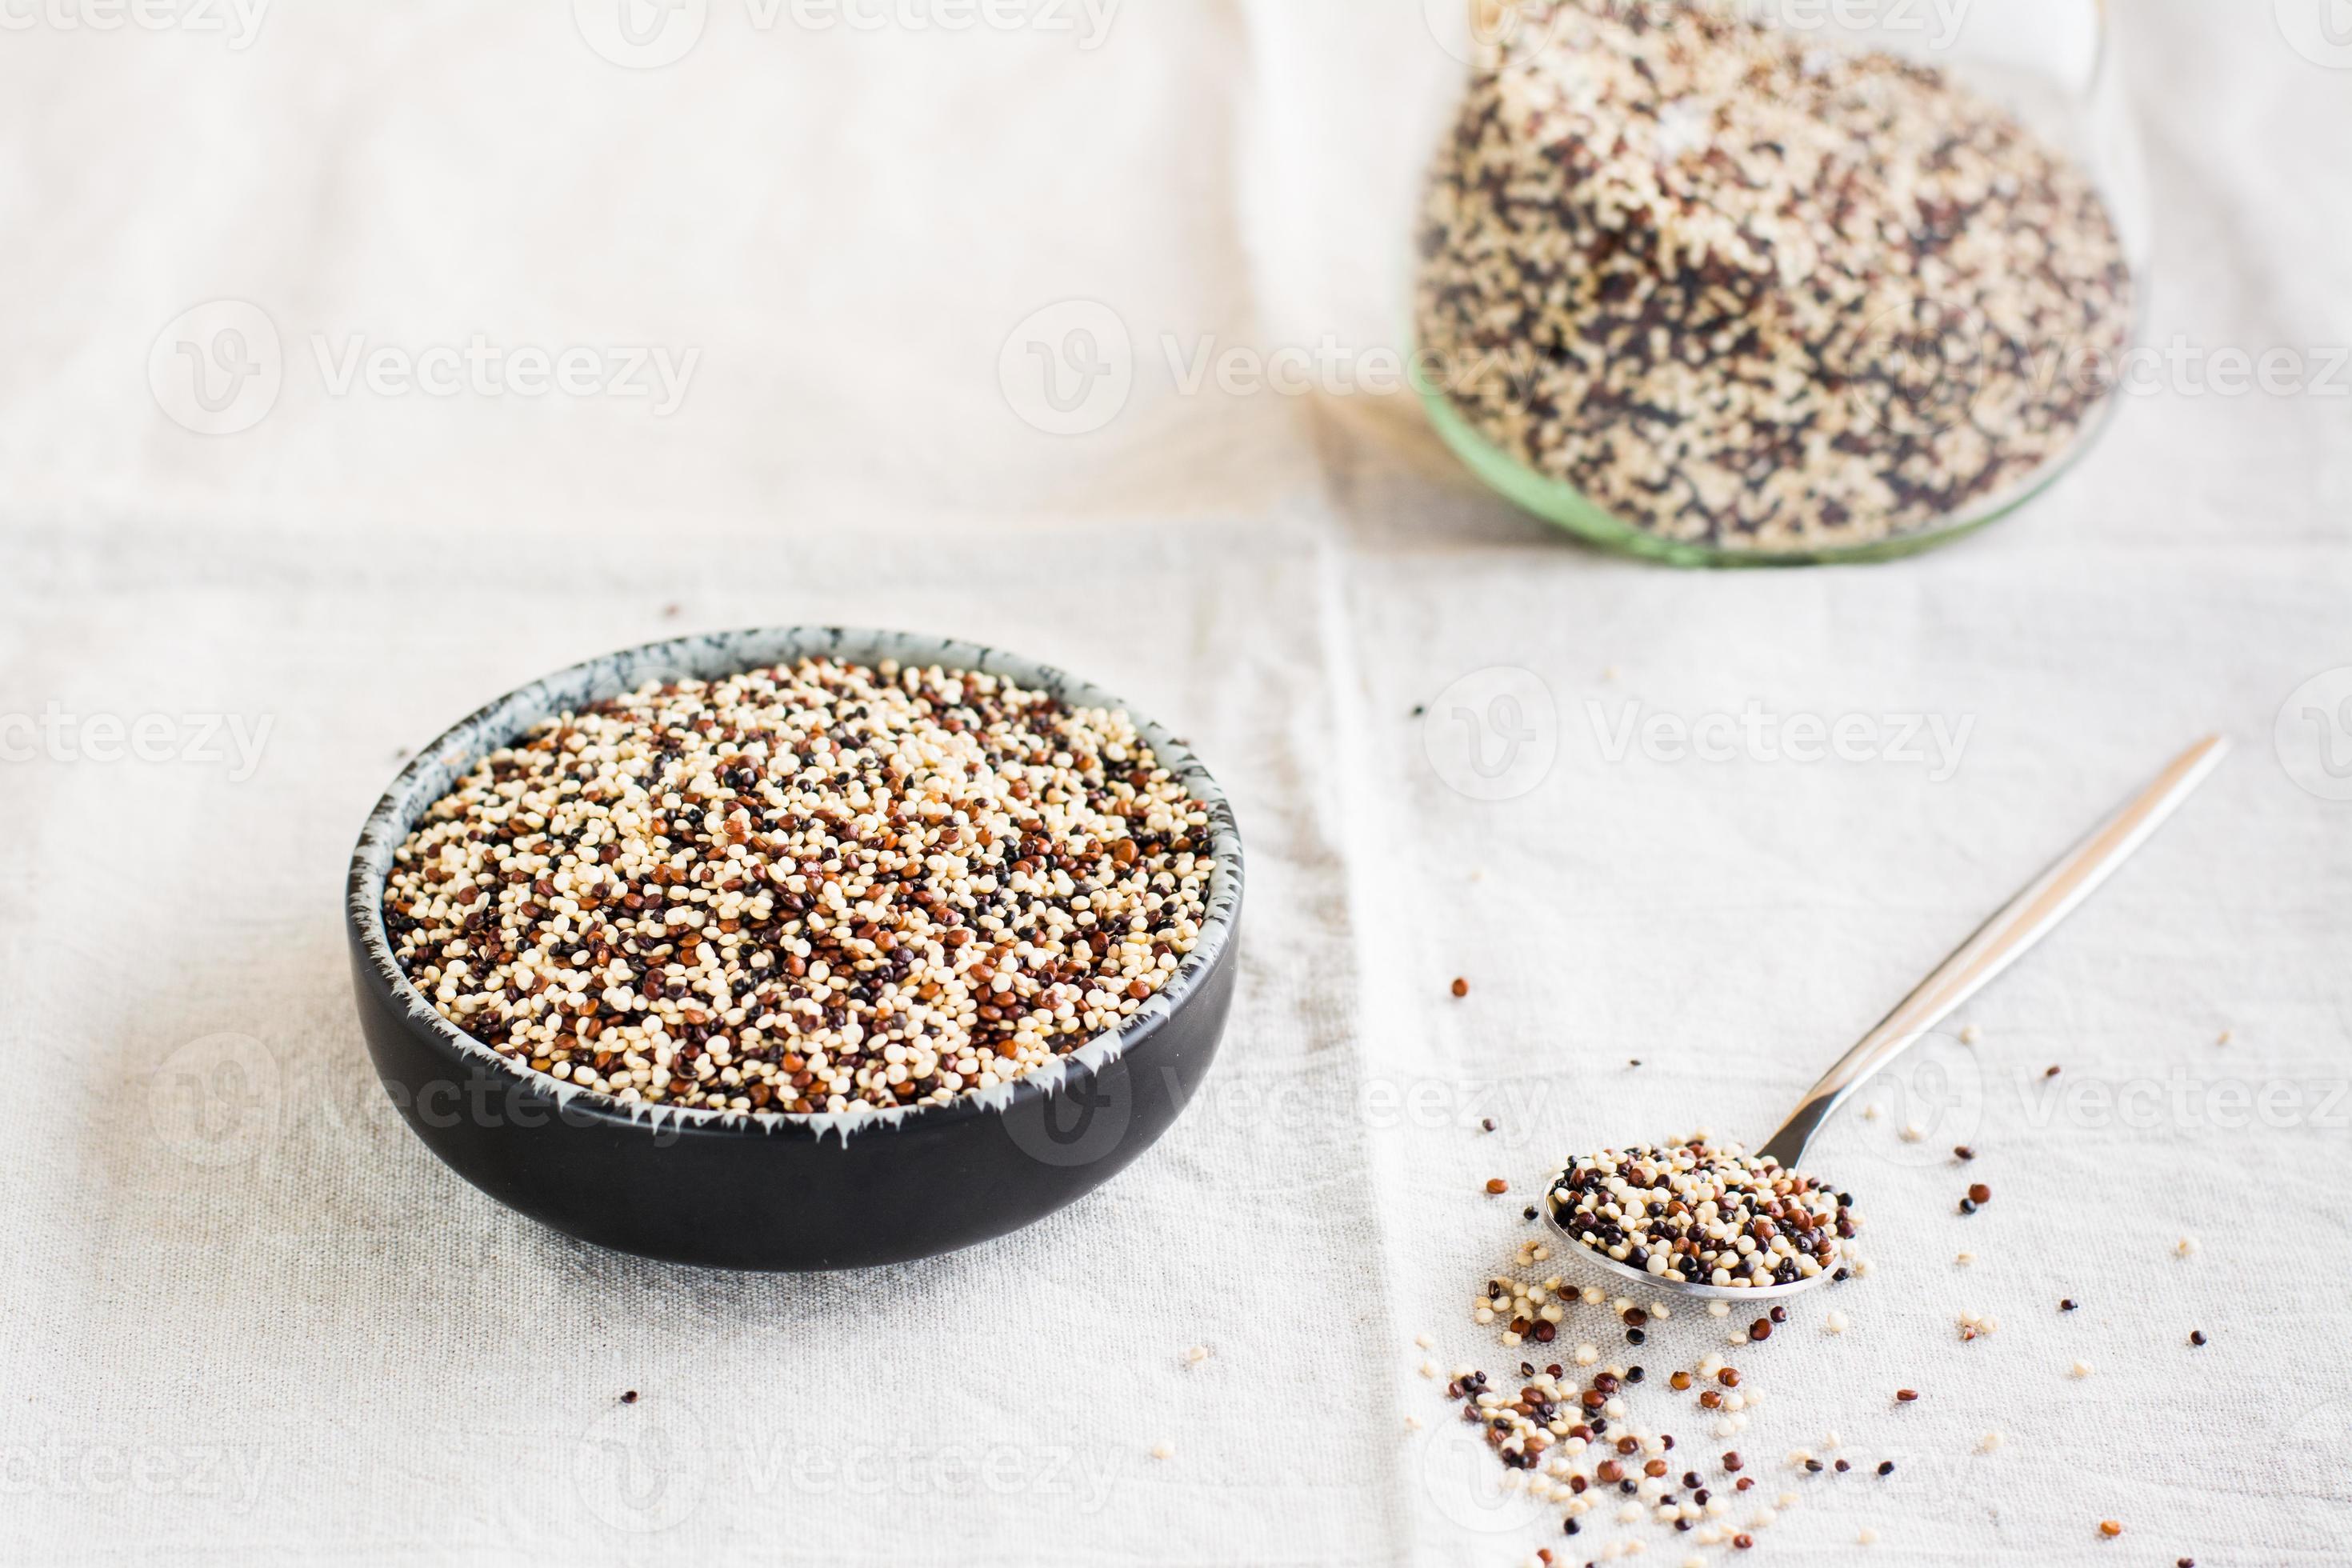 Layouten Marty Fielding presse Mix of raw white, red and black quinoa in a bowl and in a spoon on a cloth.  Healthy gluten free food 19985217 Stock Photo at Vecteezy